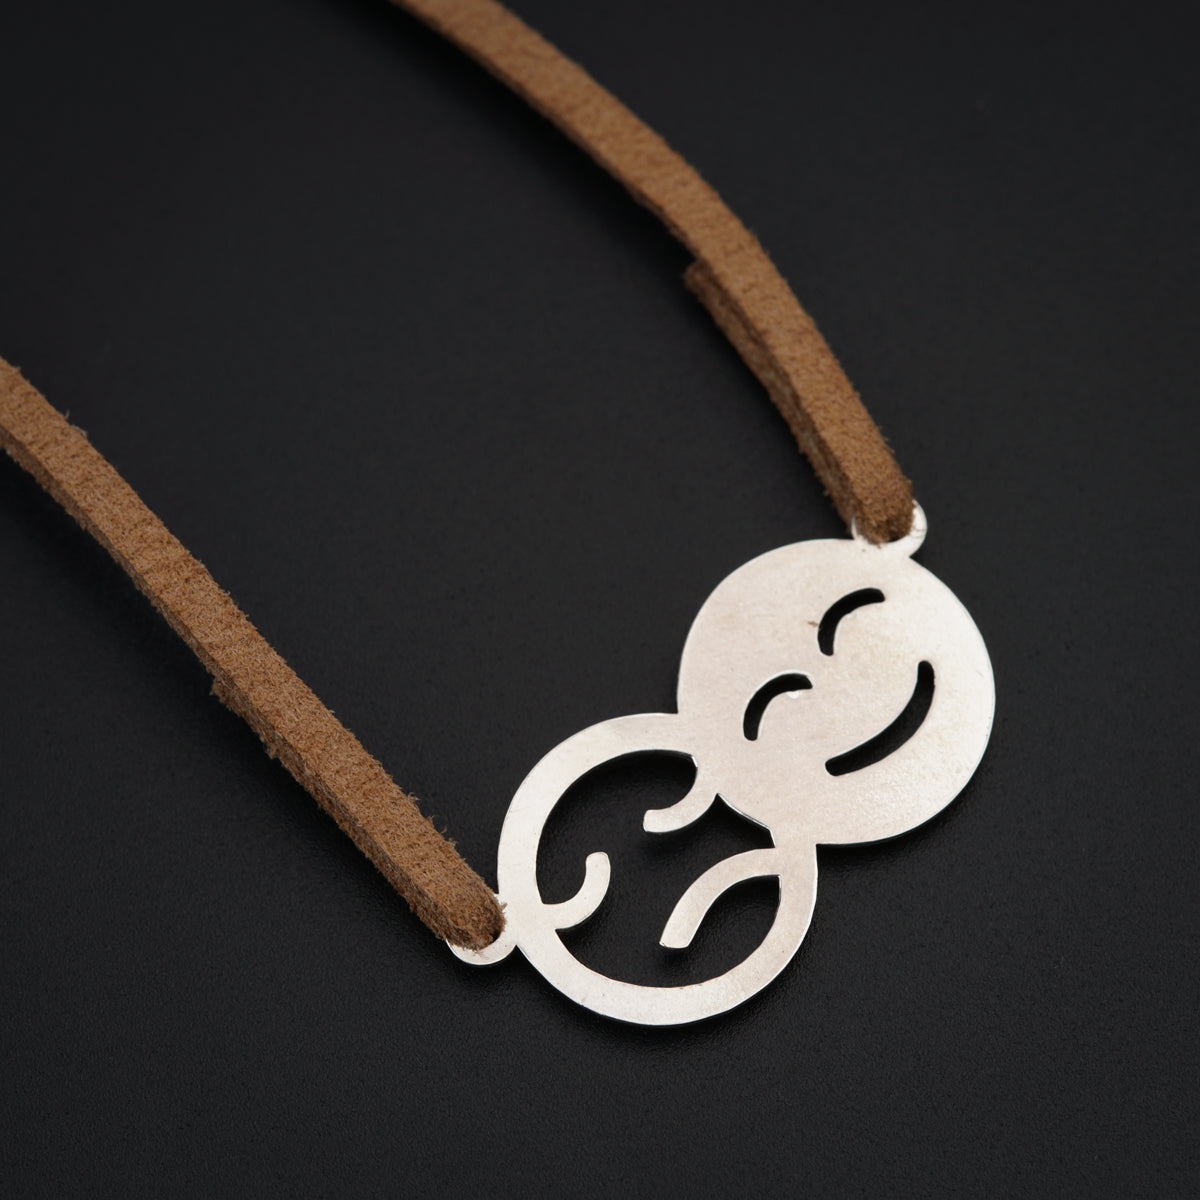 Mood Harmony Pendant with Suede Cord